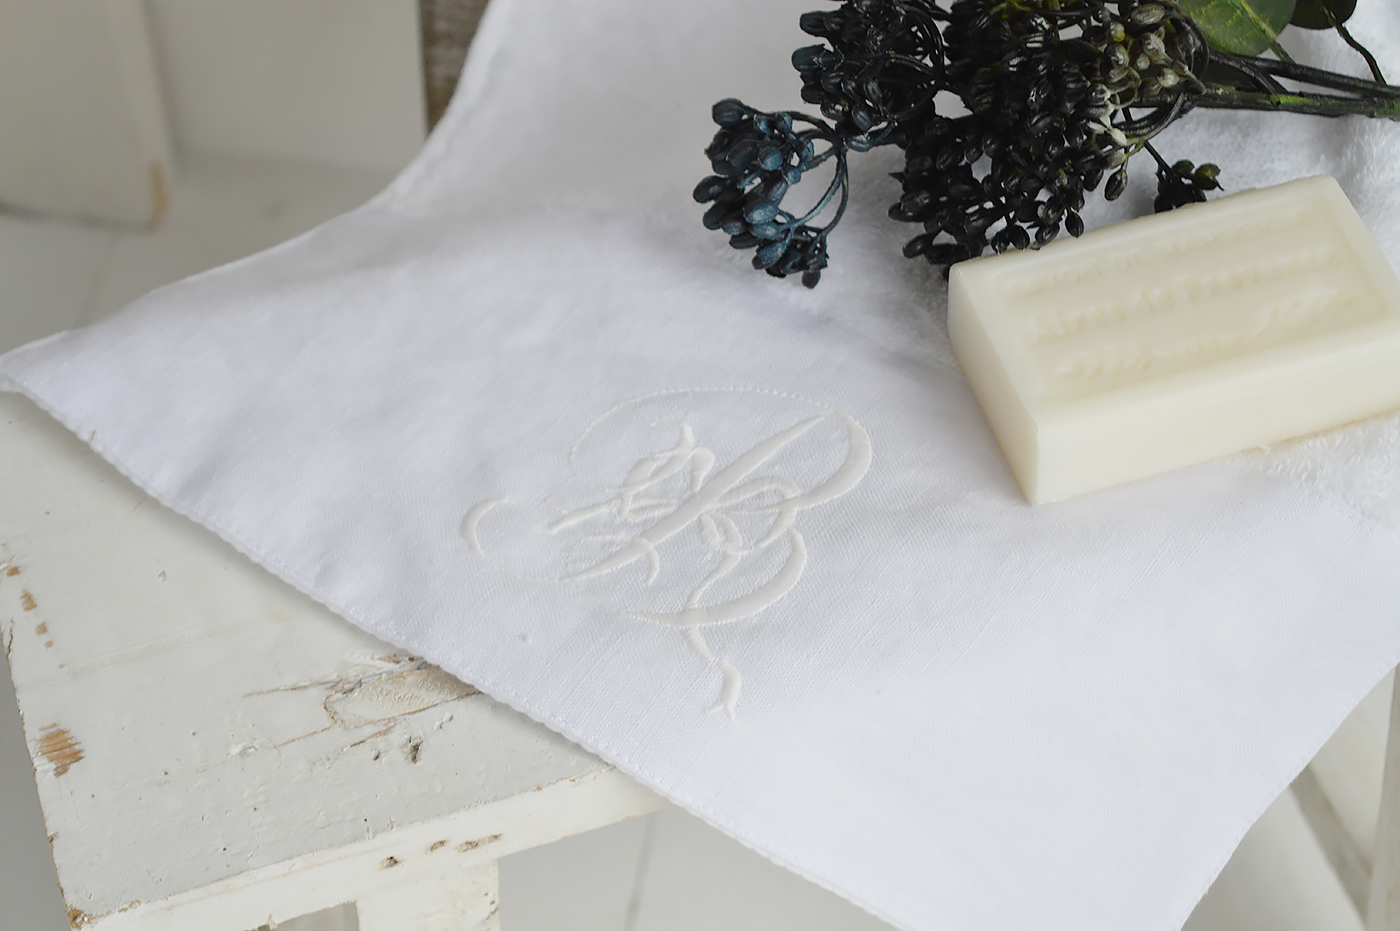 A white embroidered guest towel with monogram